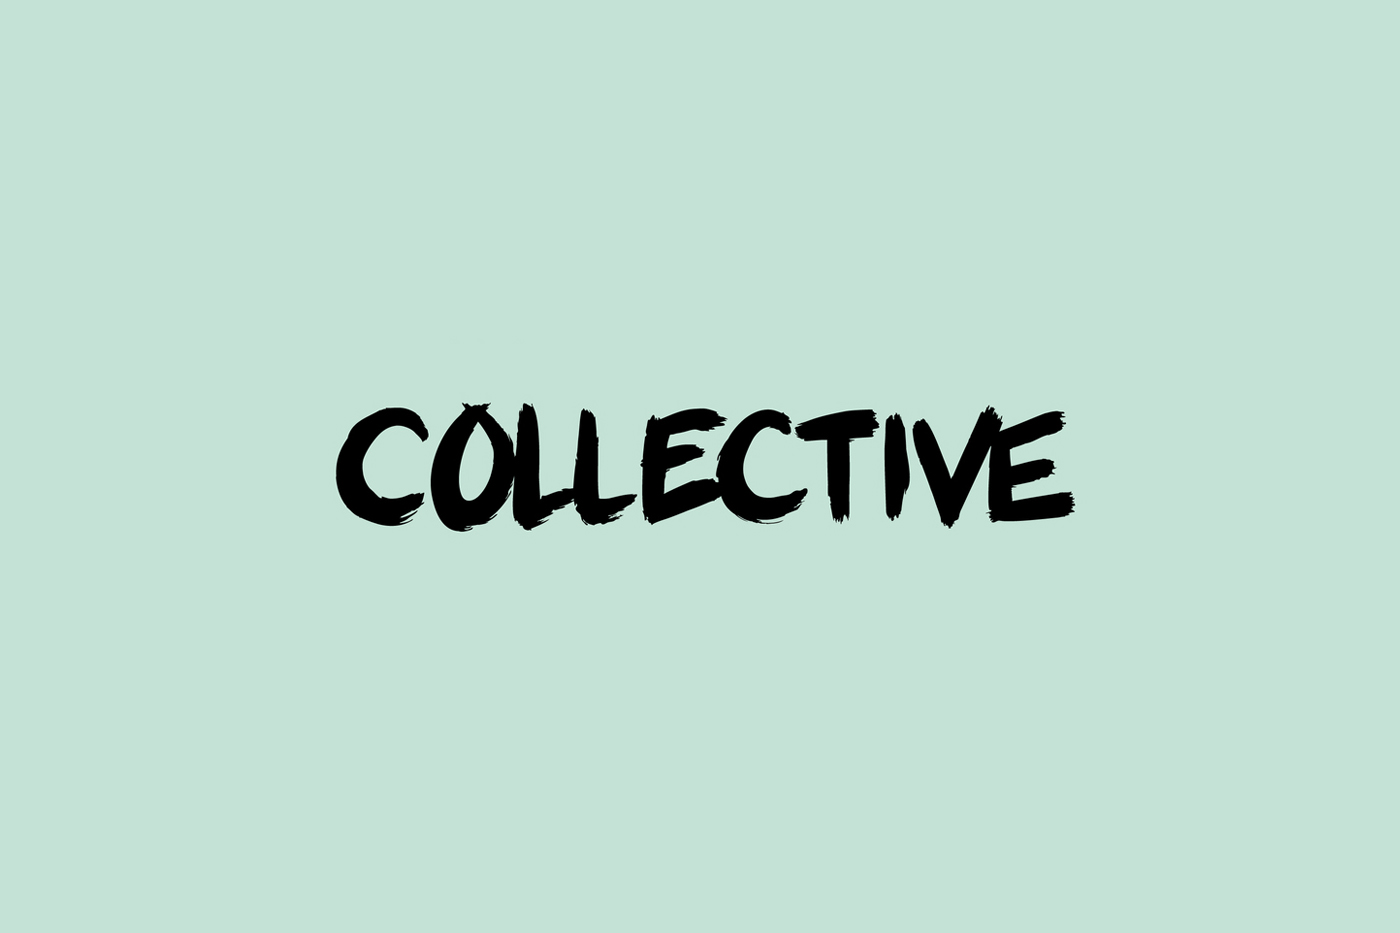 Creative Logotype Gallery & Inspiration: Collective Gallery by Graphical House, United Kingdom